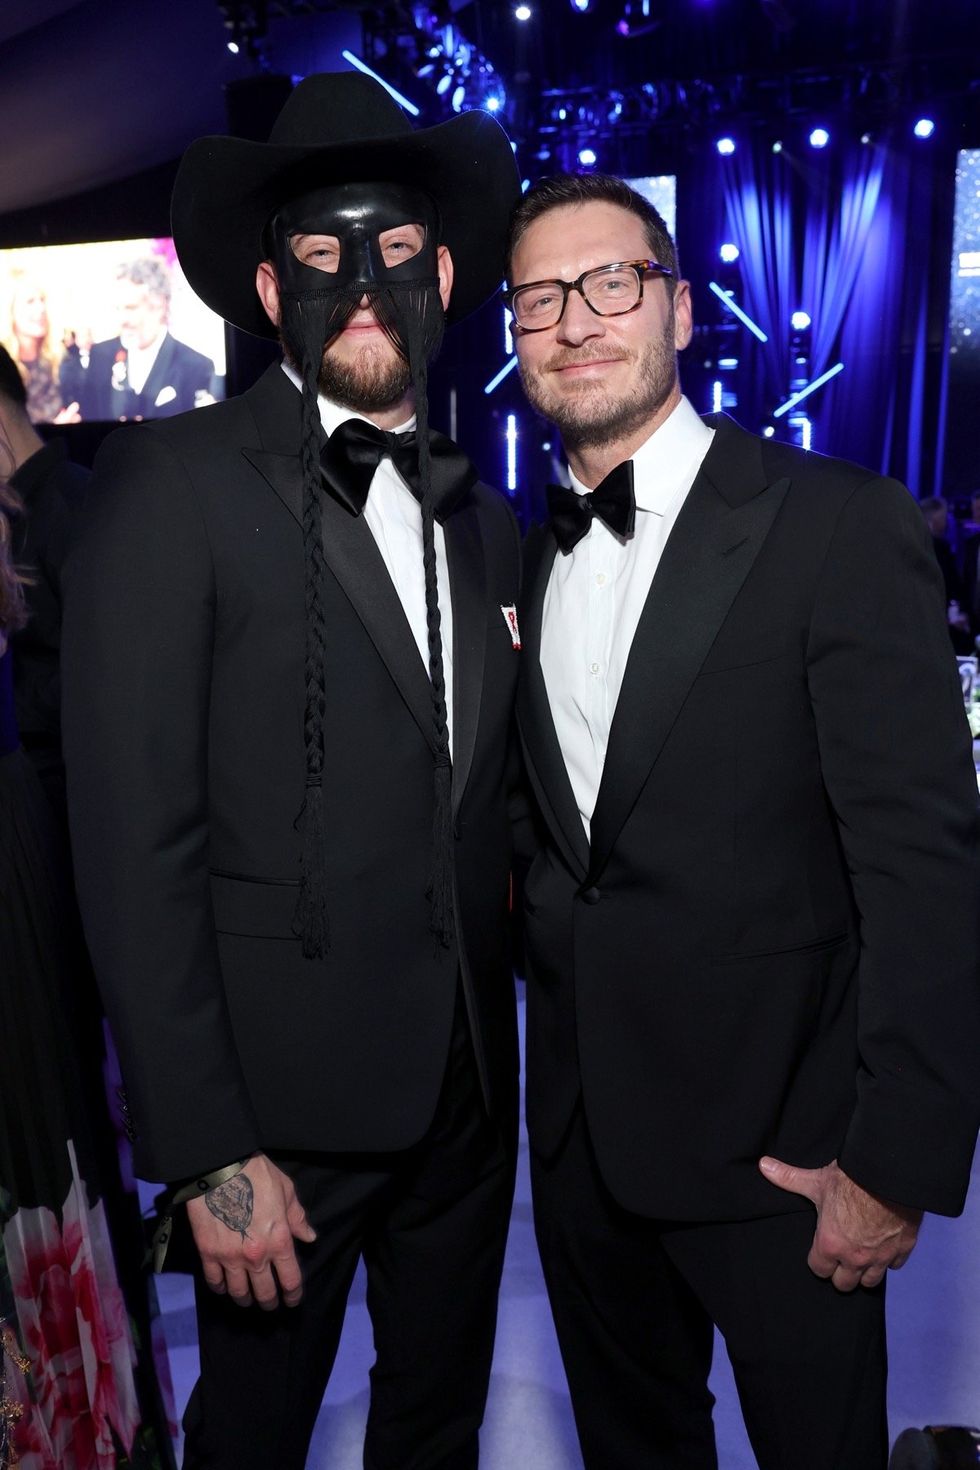 Orville Peck and William Mikelson at the Elton John AIDS Foundation's 32nd Annual Academy Awards Viewing Party